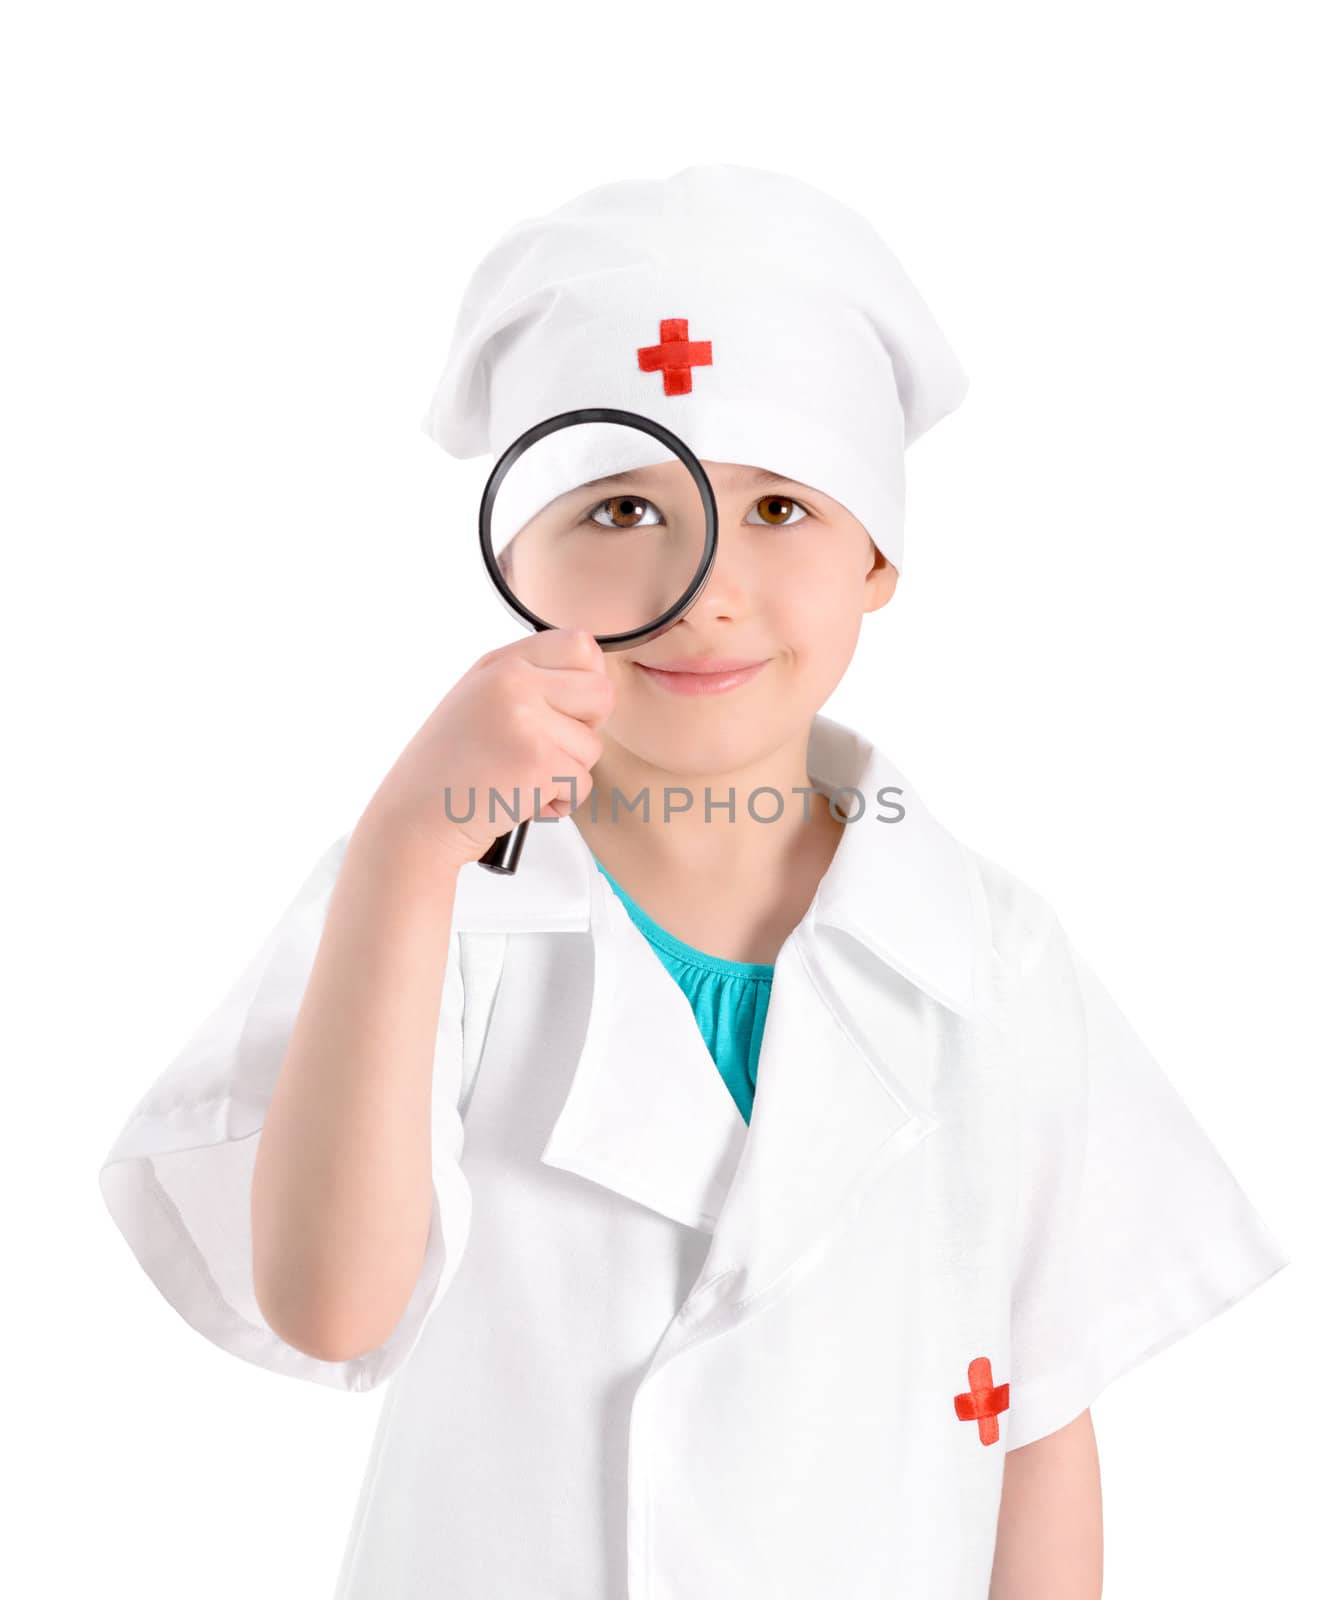 Portrait of a smiling little girl wearing as a nurse on white uniform and holding in right-hand a magnifying glass in front of her eye. Isolated on white background.